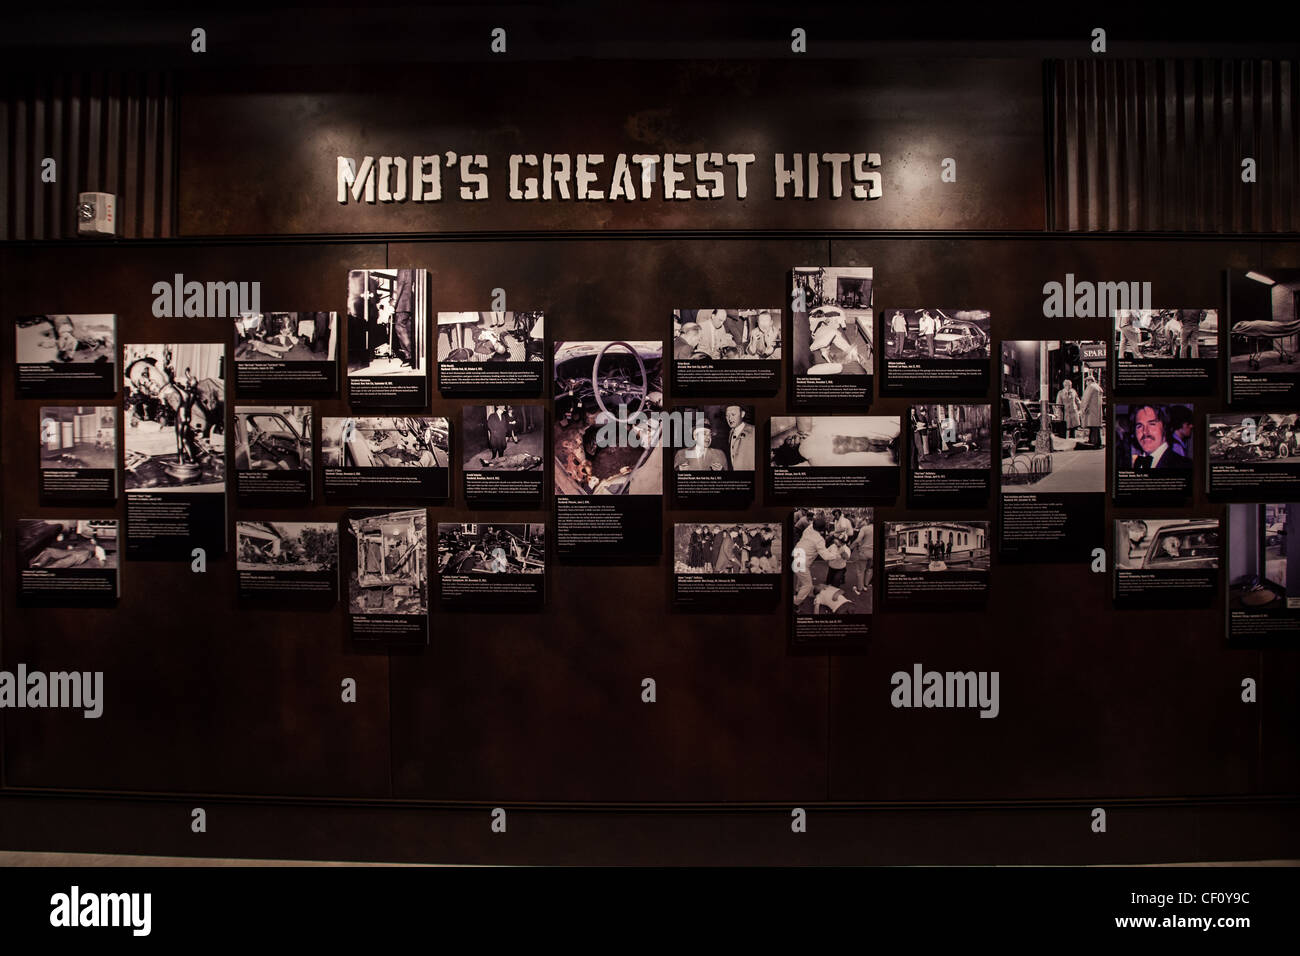 Exhibit showing mob assassinations at the Mob Museum opened in a former courthouse in Las Vegas on February 14, 2012. The $42 million dollar museum features exhibits on organized crime in America with emphasis on their role in Las Vegas. Stock Photo